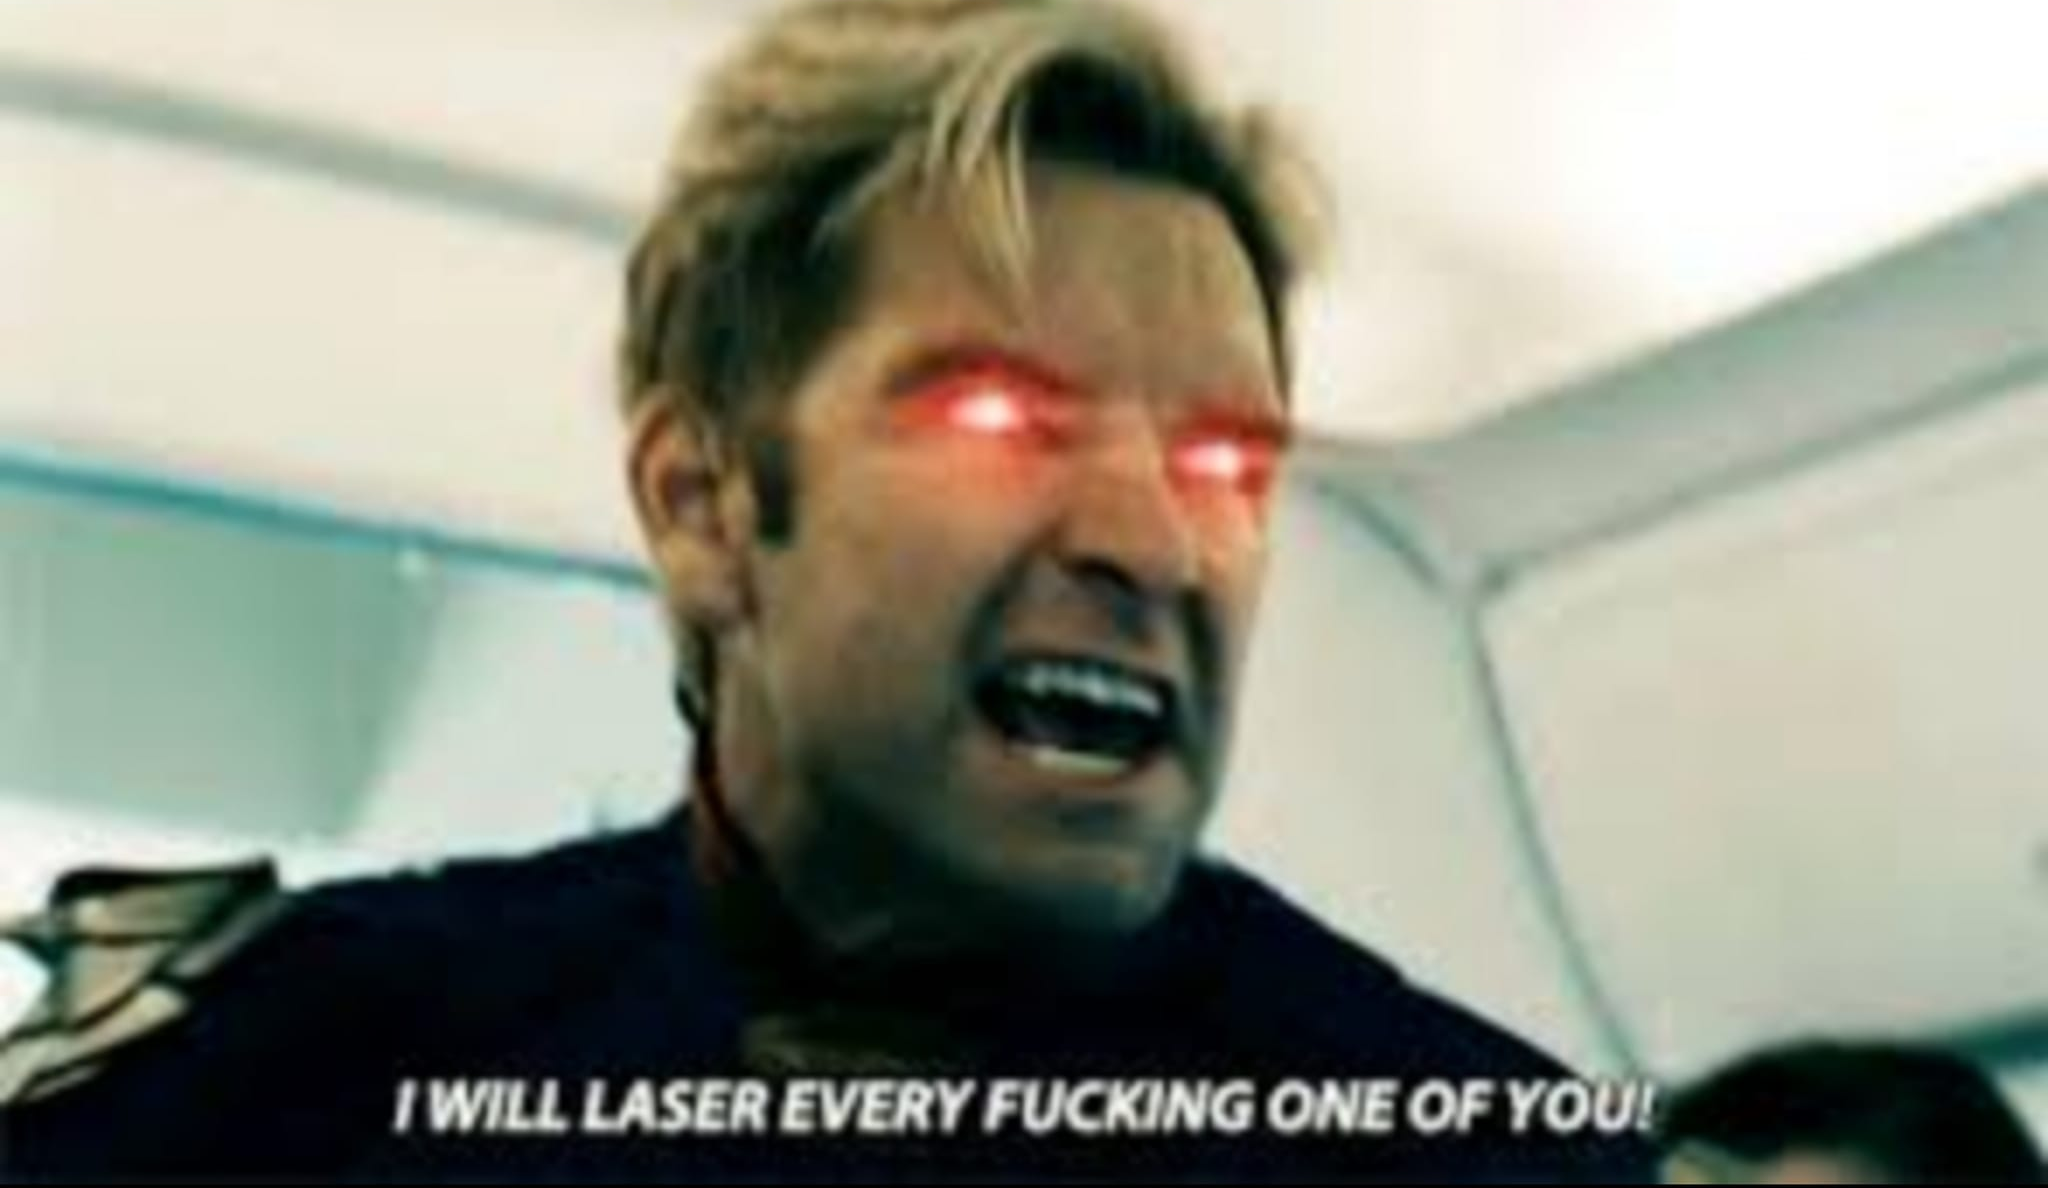 High Quality HOMELANDER "I WILL LASER EVERY ONE OF YOU" Blank Meme Template